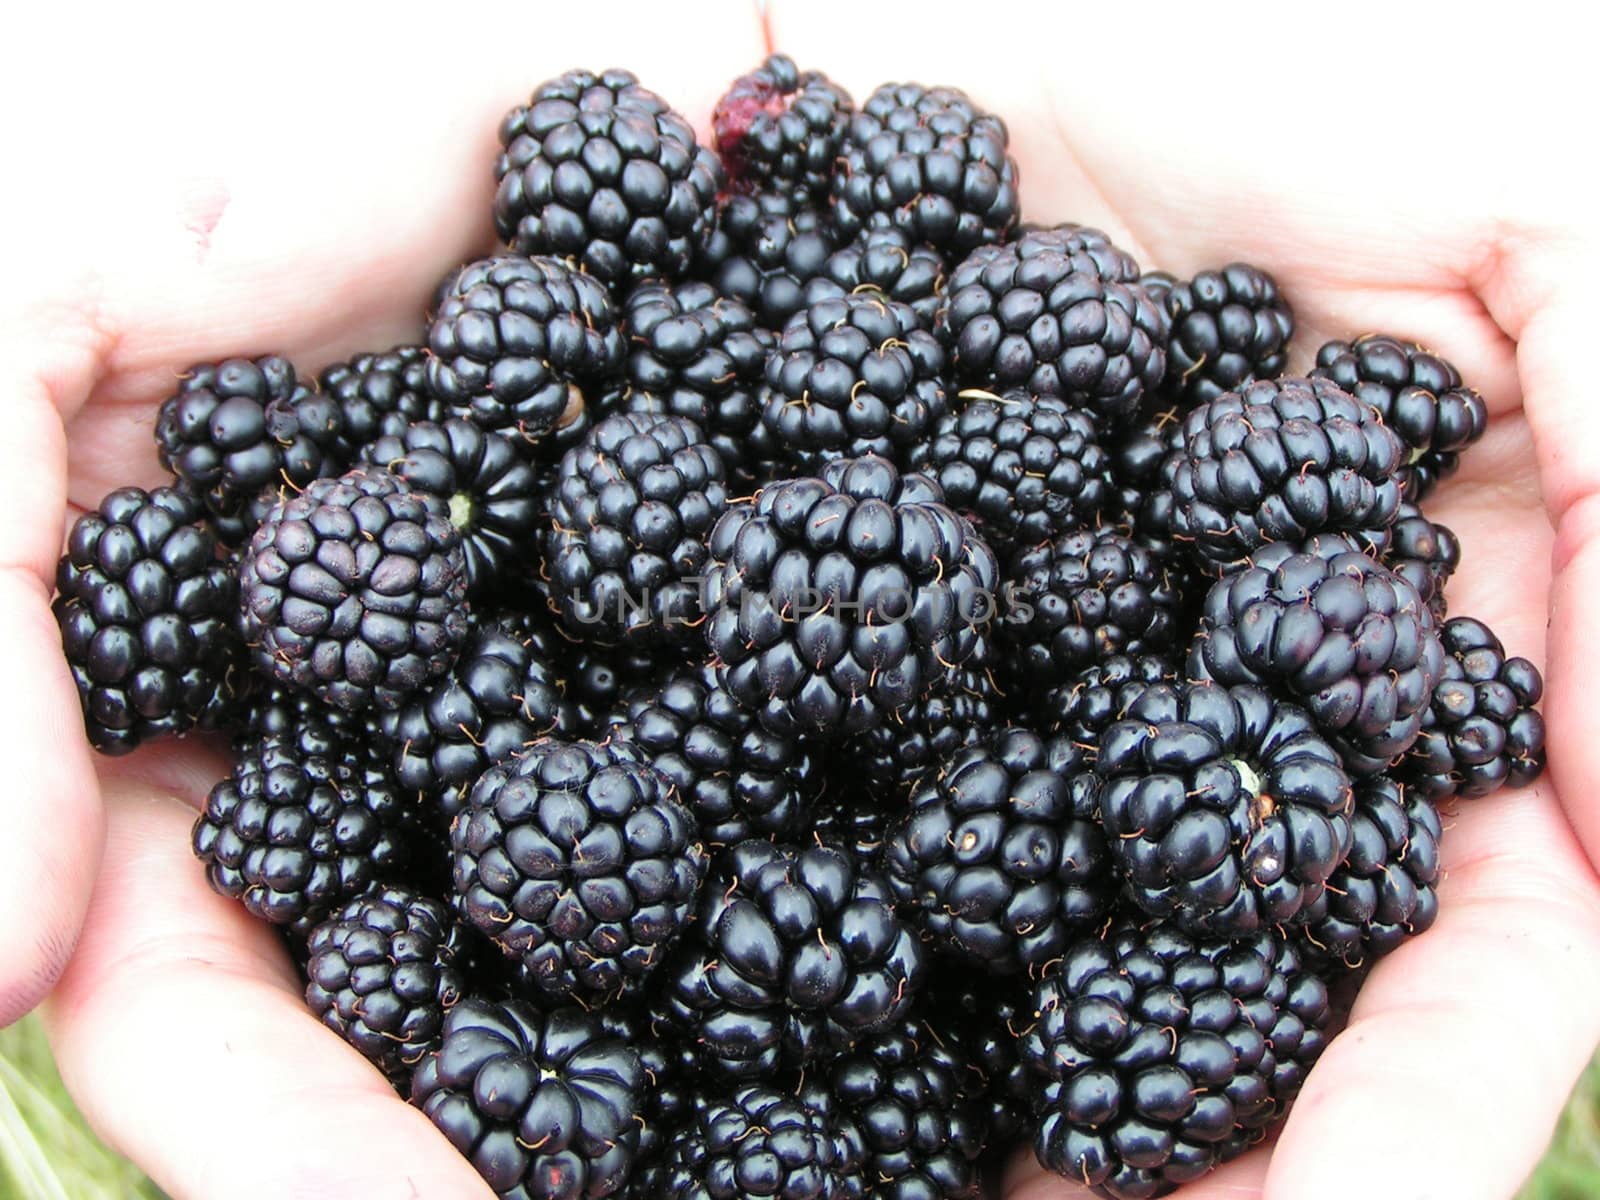 Blackberries, offered in hands. close-up